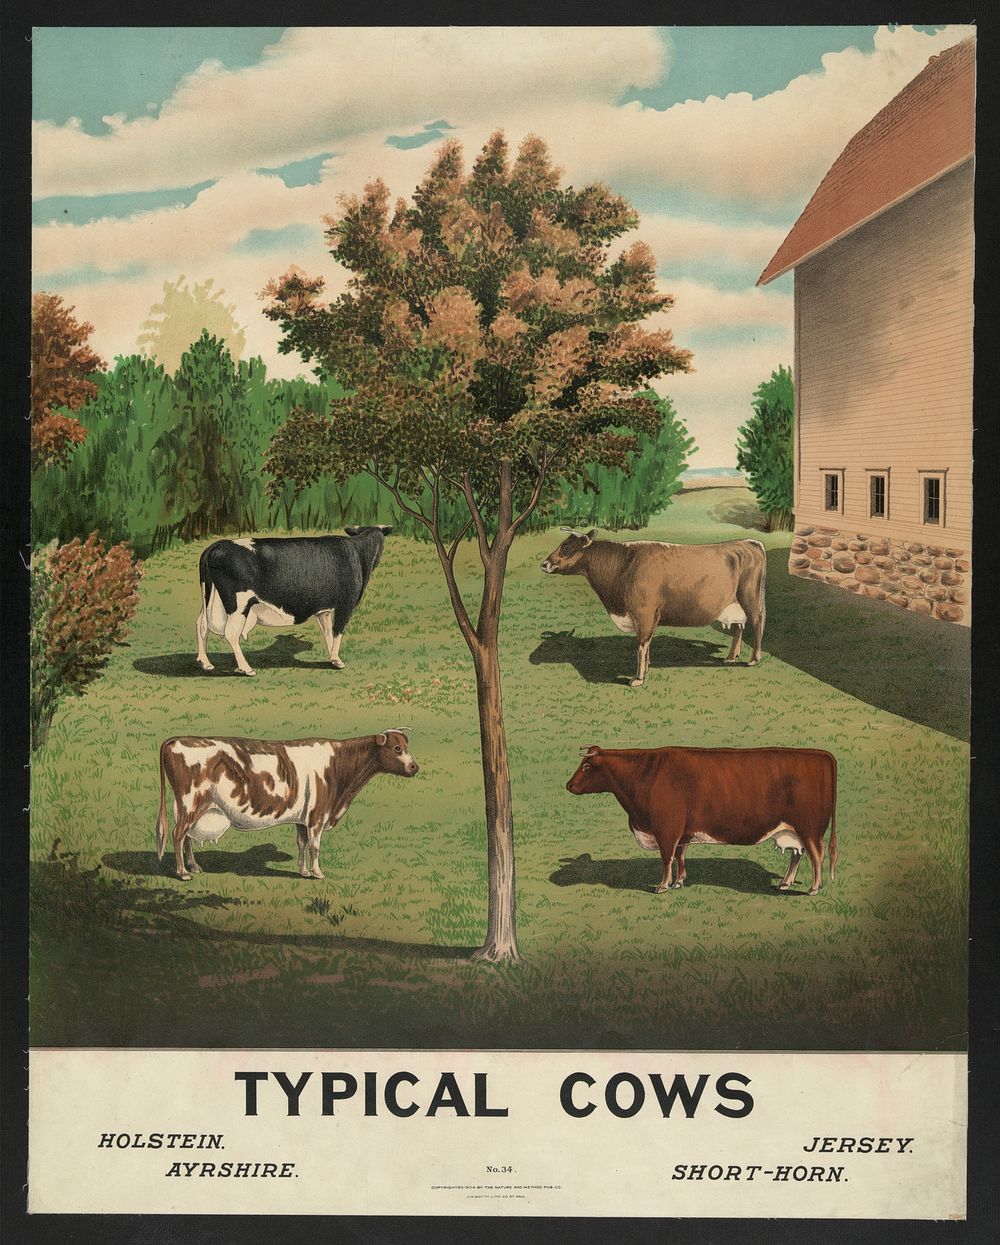 Typical cows (1904). Original from the Library of Congress.